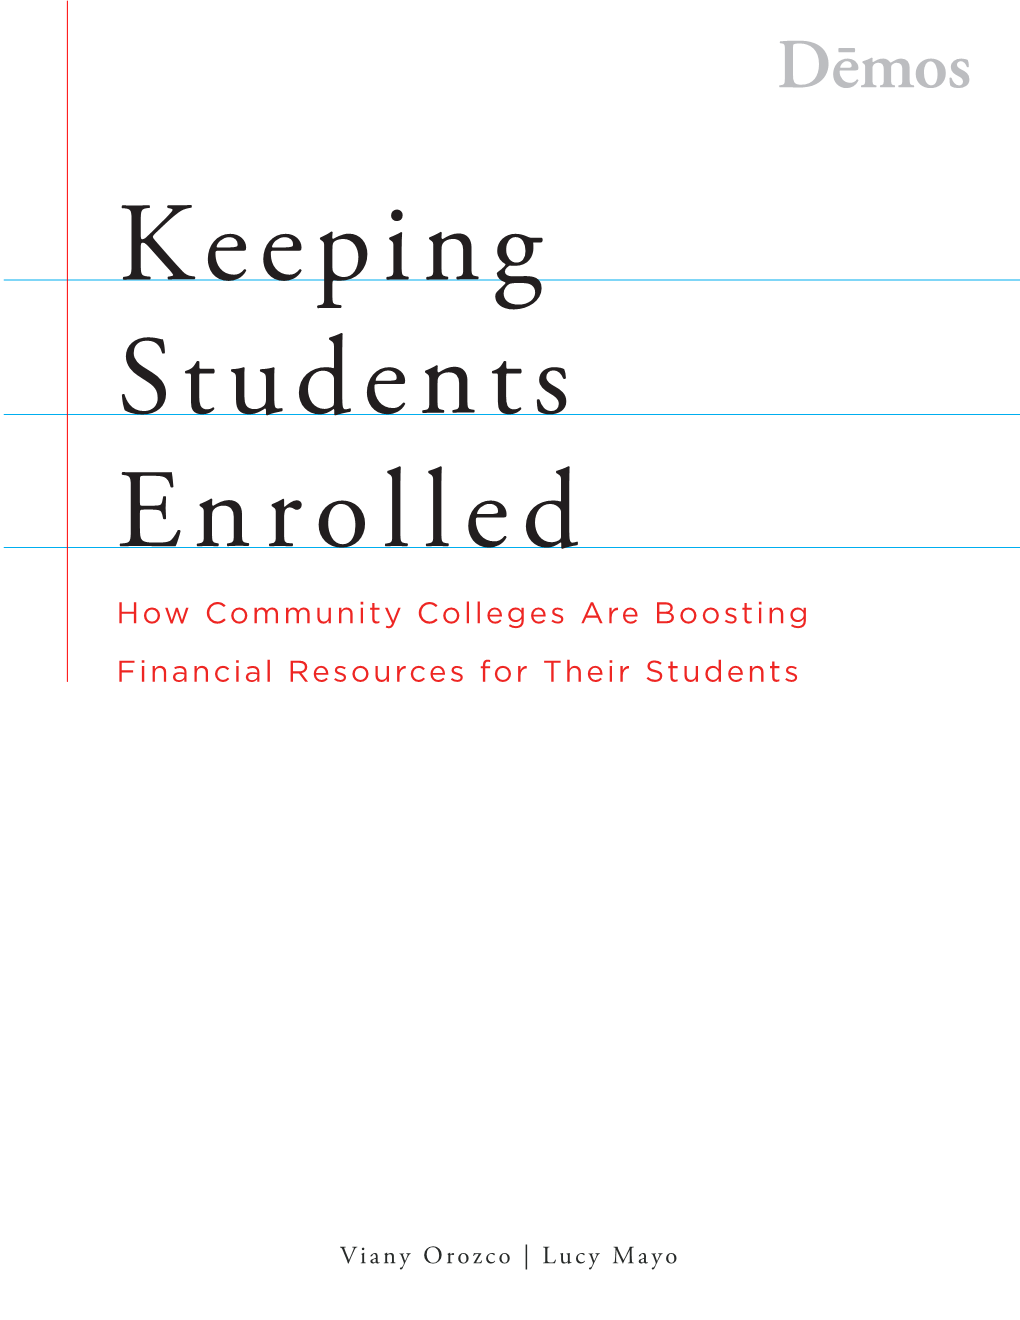 Keeping Students Enrolled How Community Colleges Are Boosting Financial Resources for Their Students